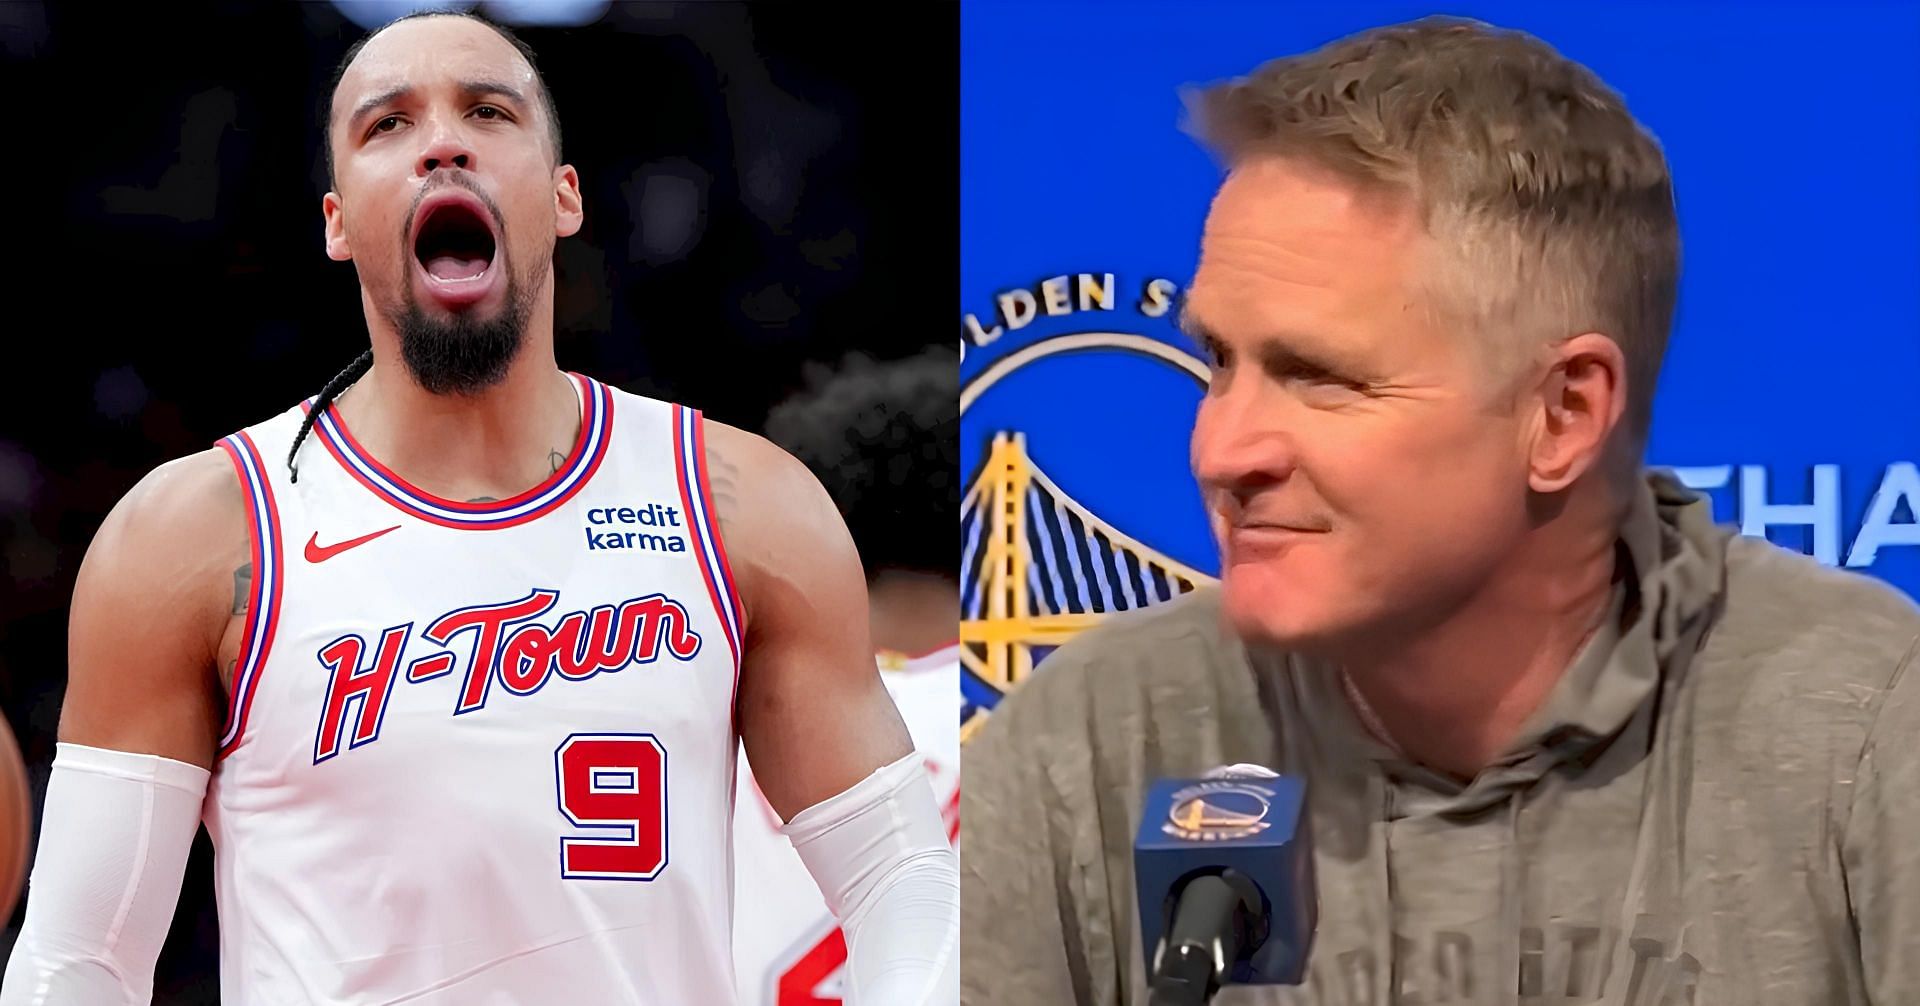 Steve Kerr jokingly humiliates Rockets wing while reflecting his thoughts on Canadians